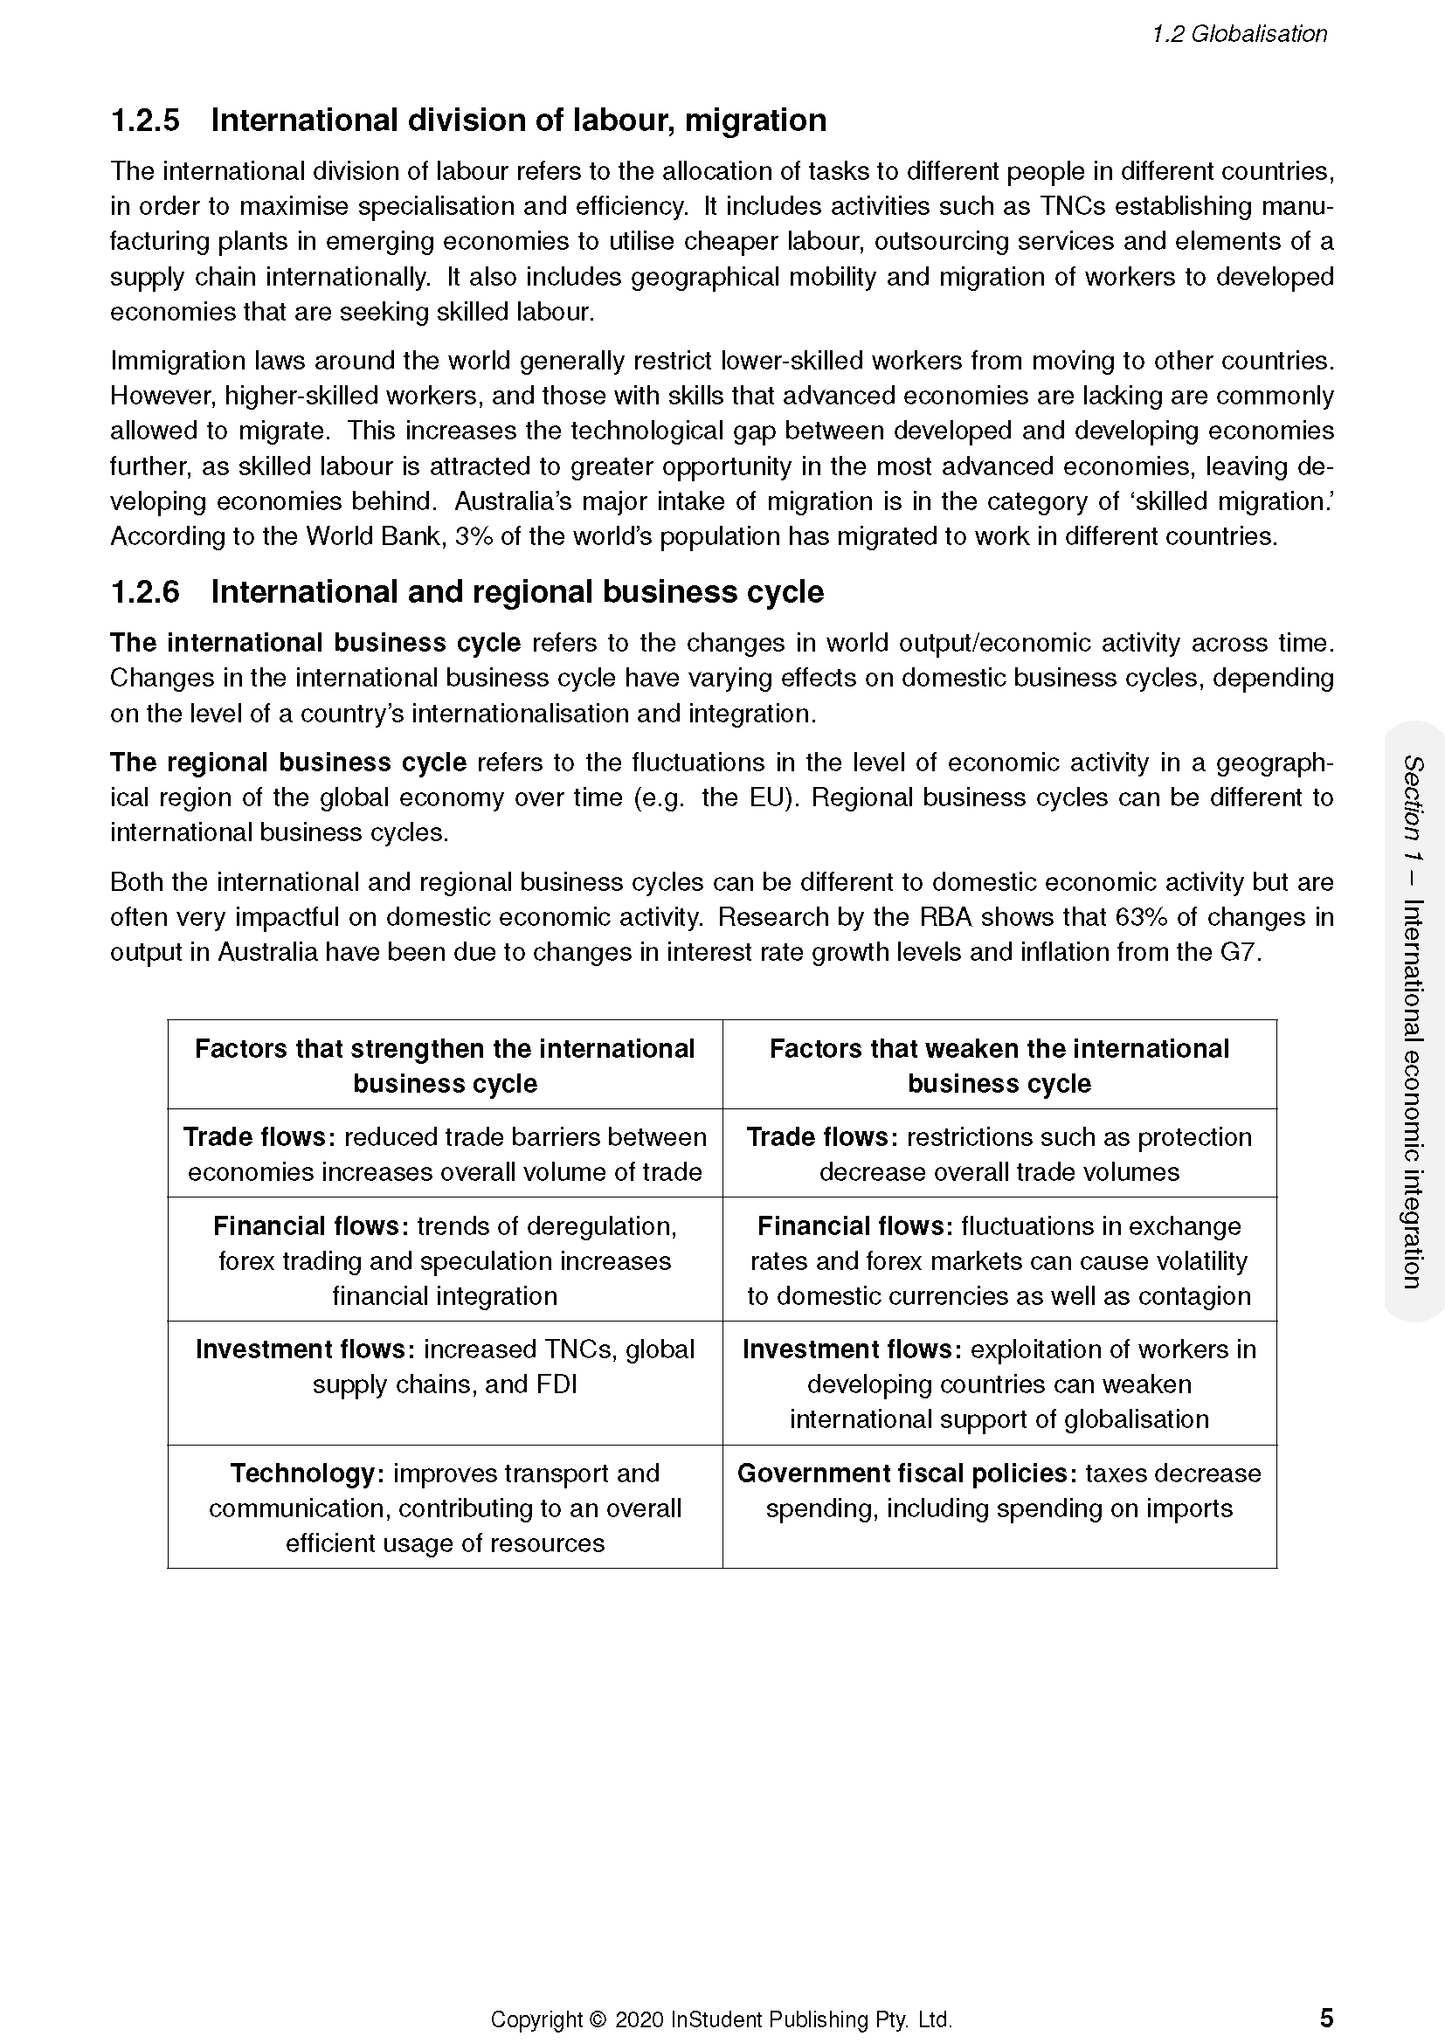 ATAR Notes HSC Year 12 Economics Complete Course Notes